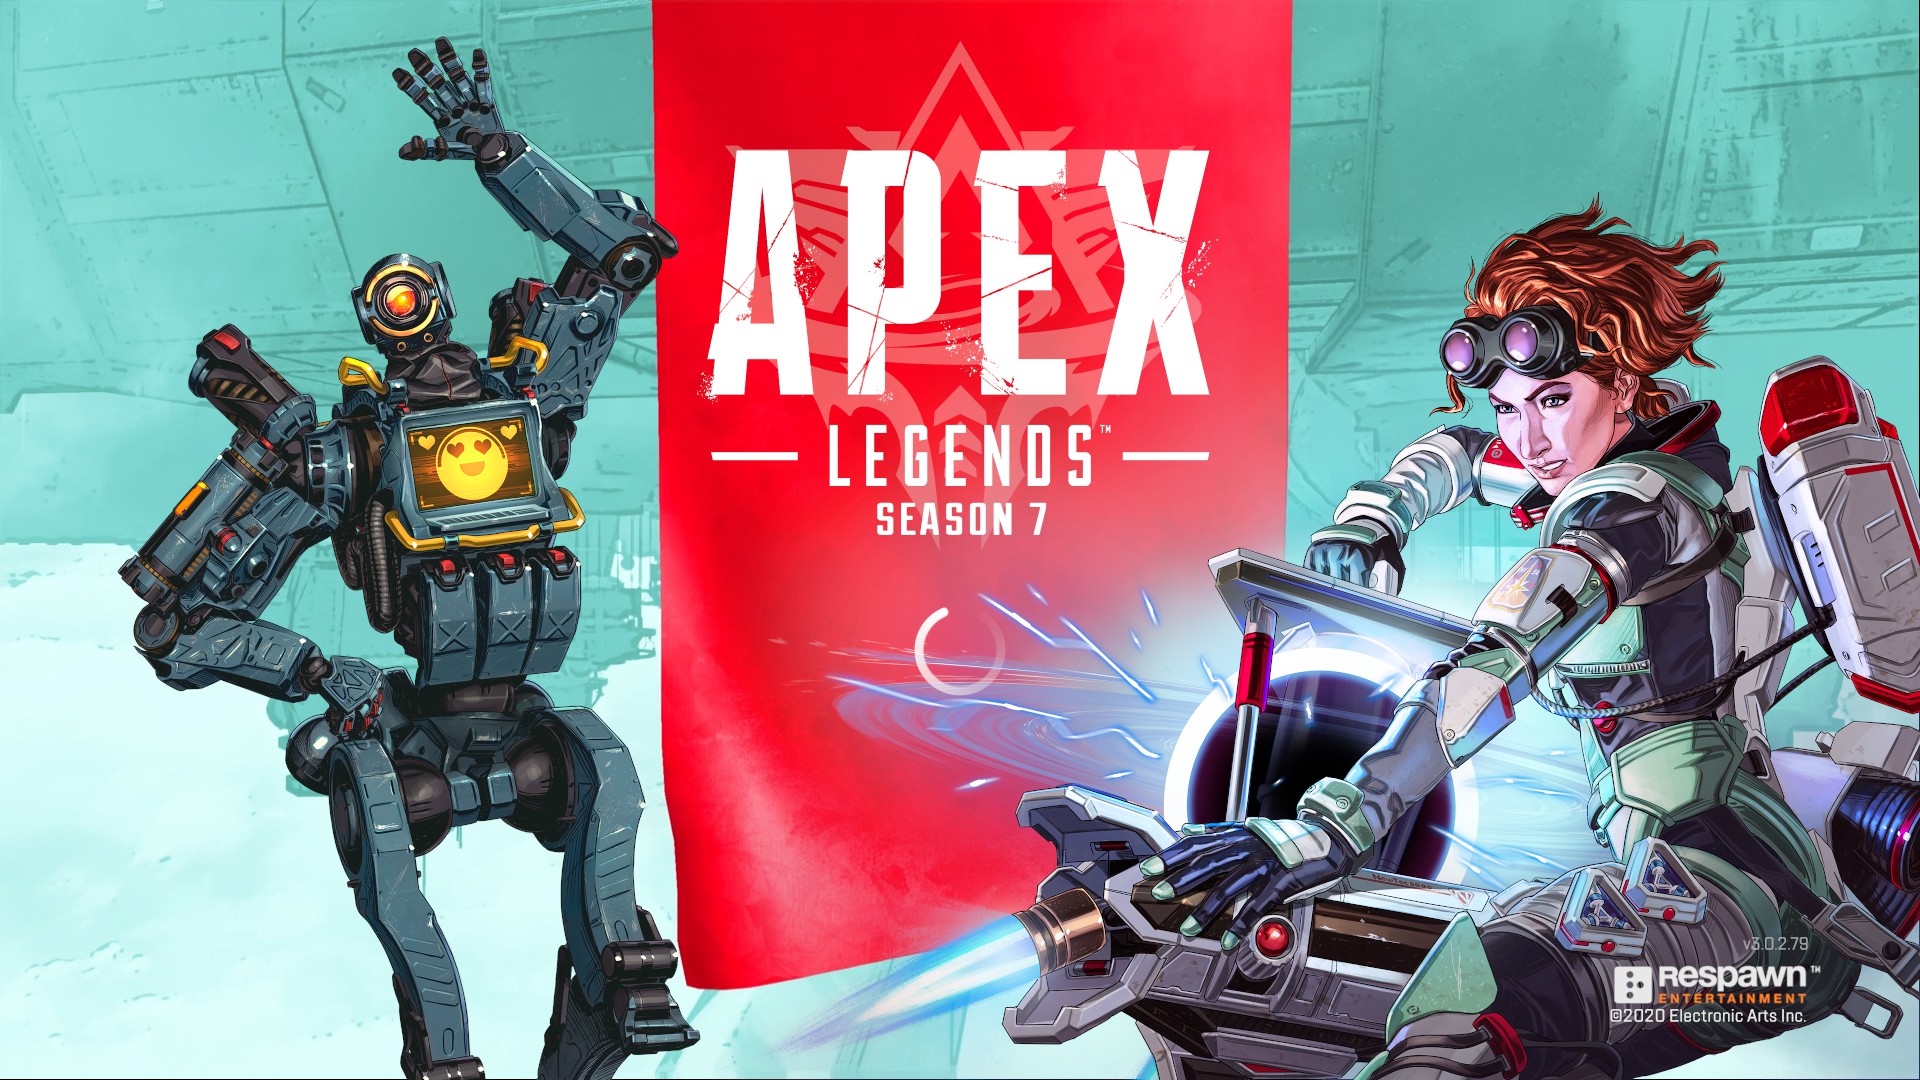 Apex Legends will run at 1024 x 576p and 30 FPS on Switch handheld